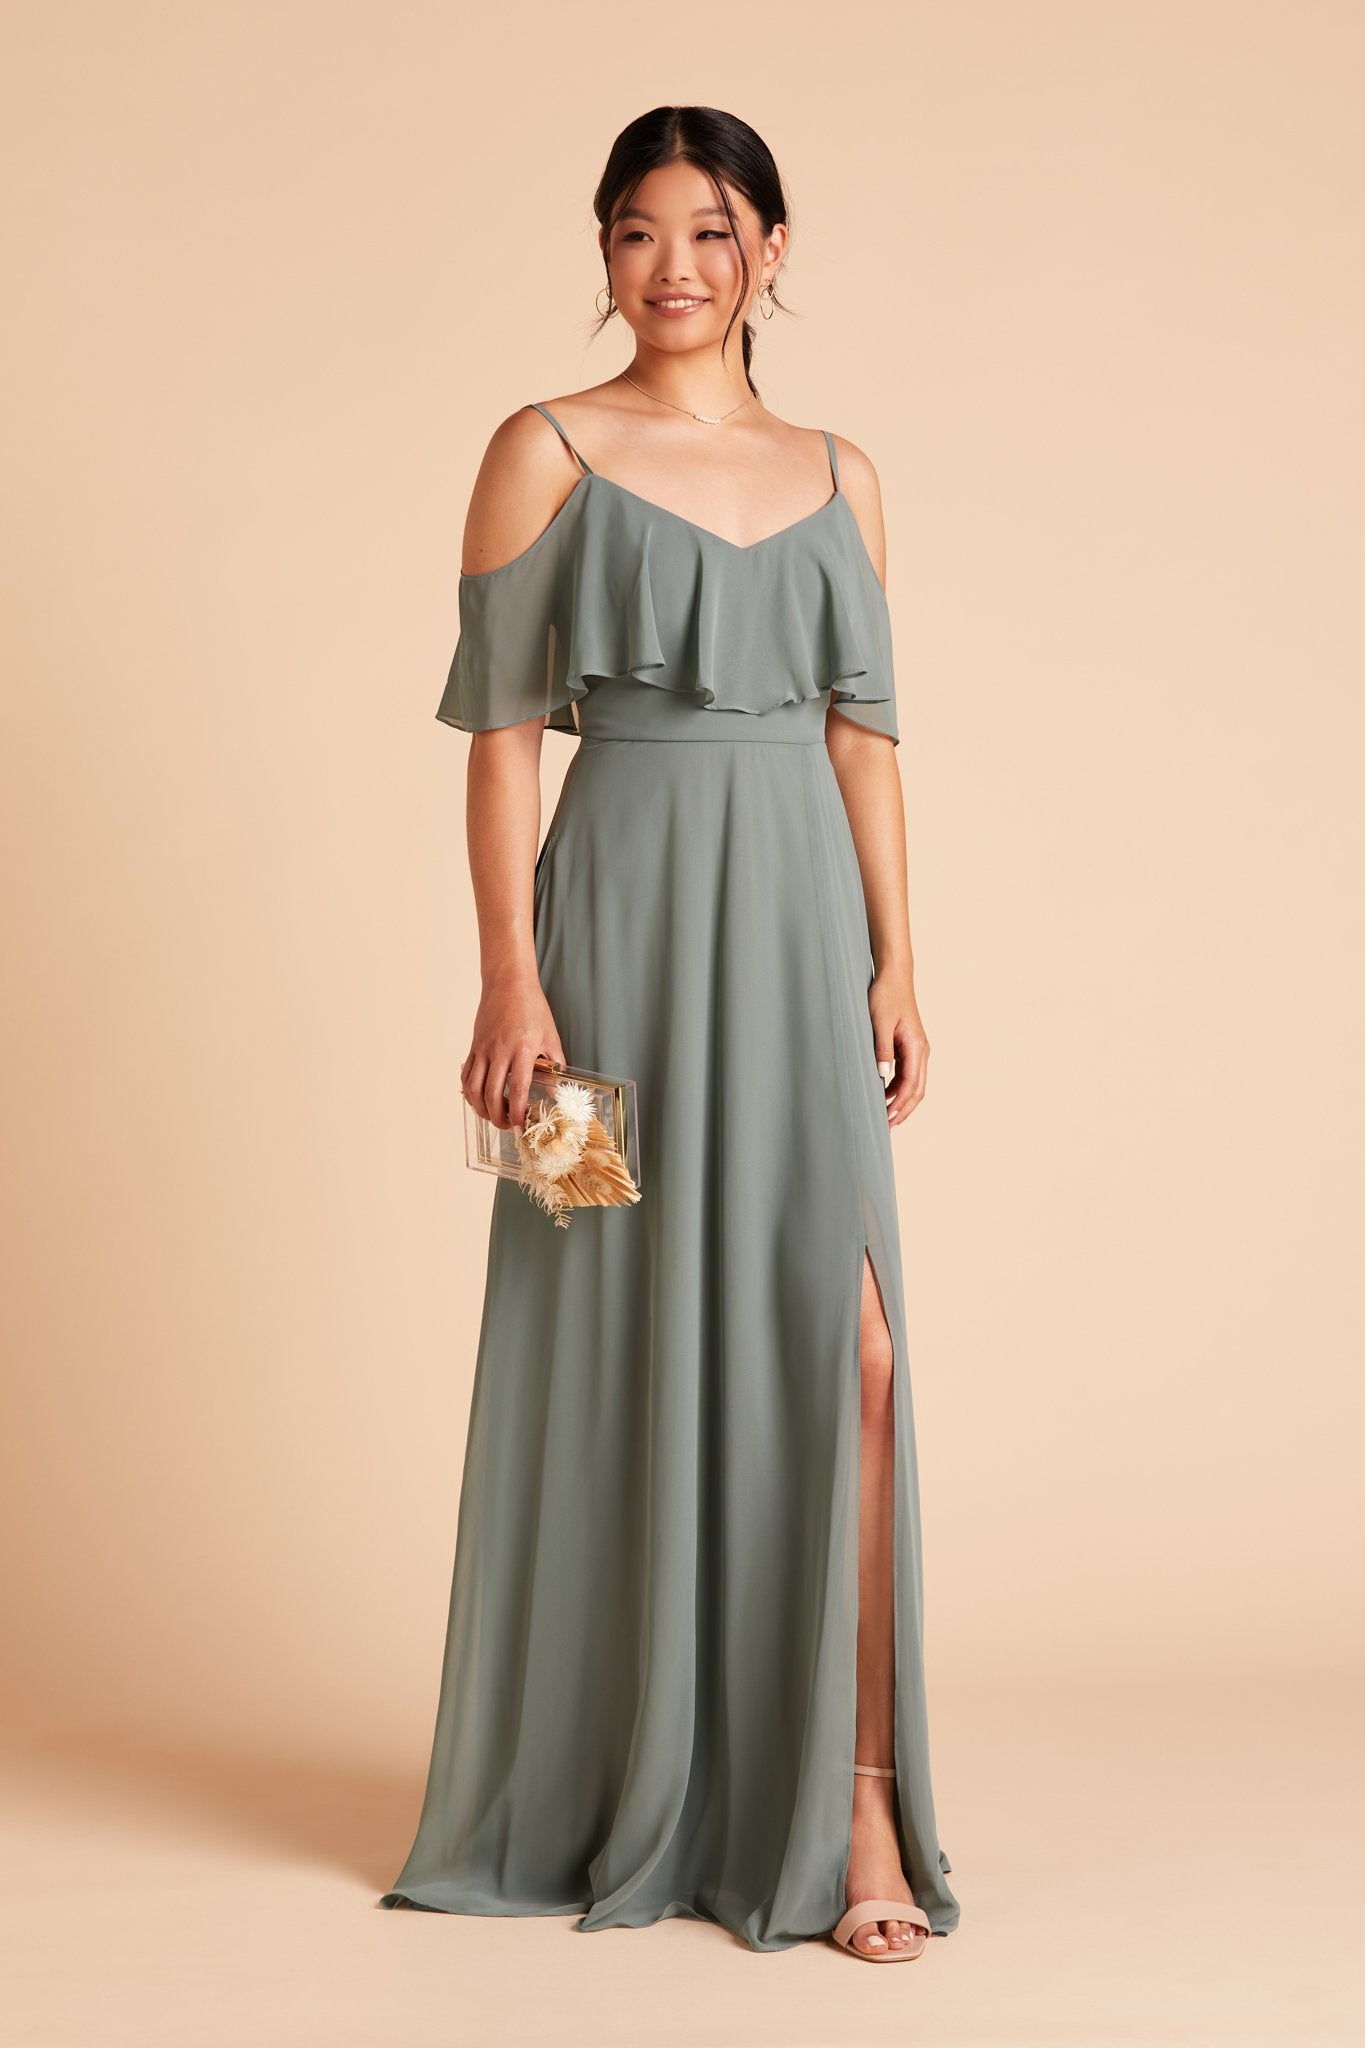 Jane convertible bridesmaid dress with slit in sea glass green chiffon by Birdy Grey, front view